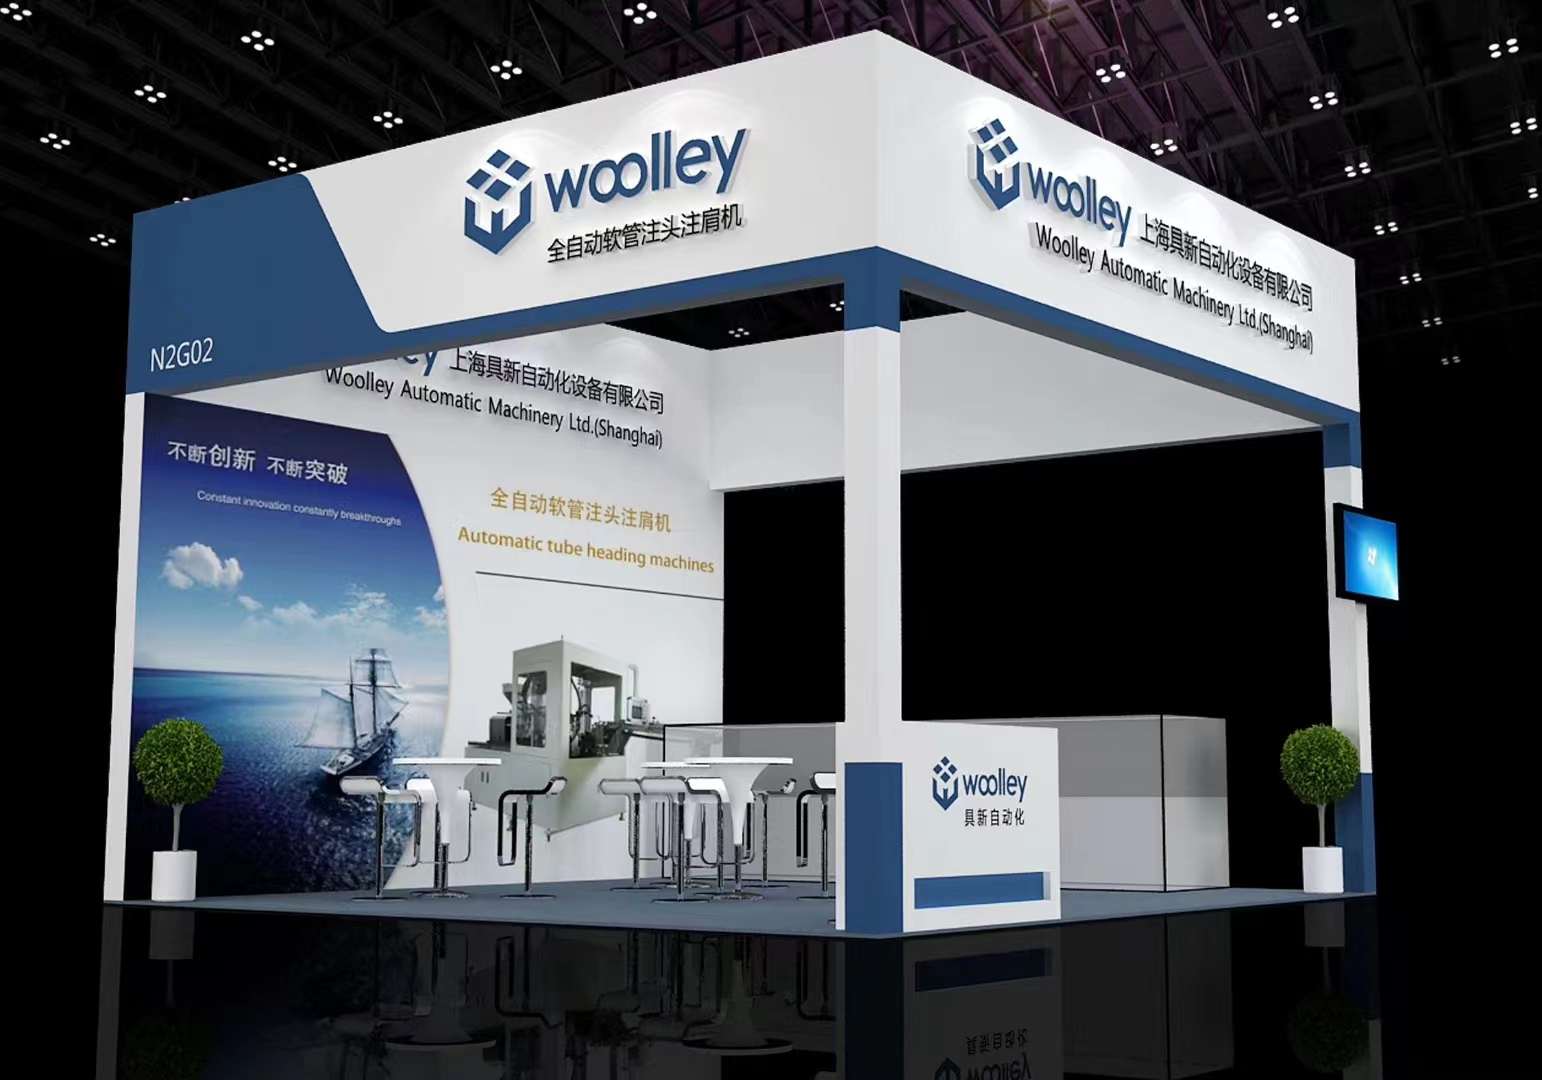 Woolley Automatic Machine Machinery Equipment attended K-Show and Interpack and CBE exhibition.jpg